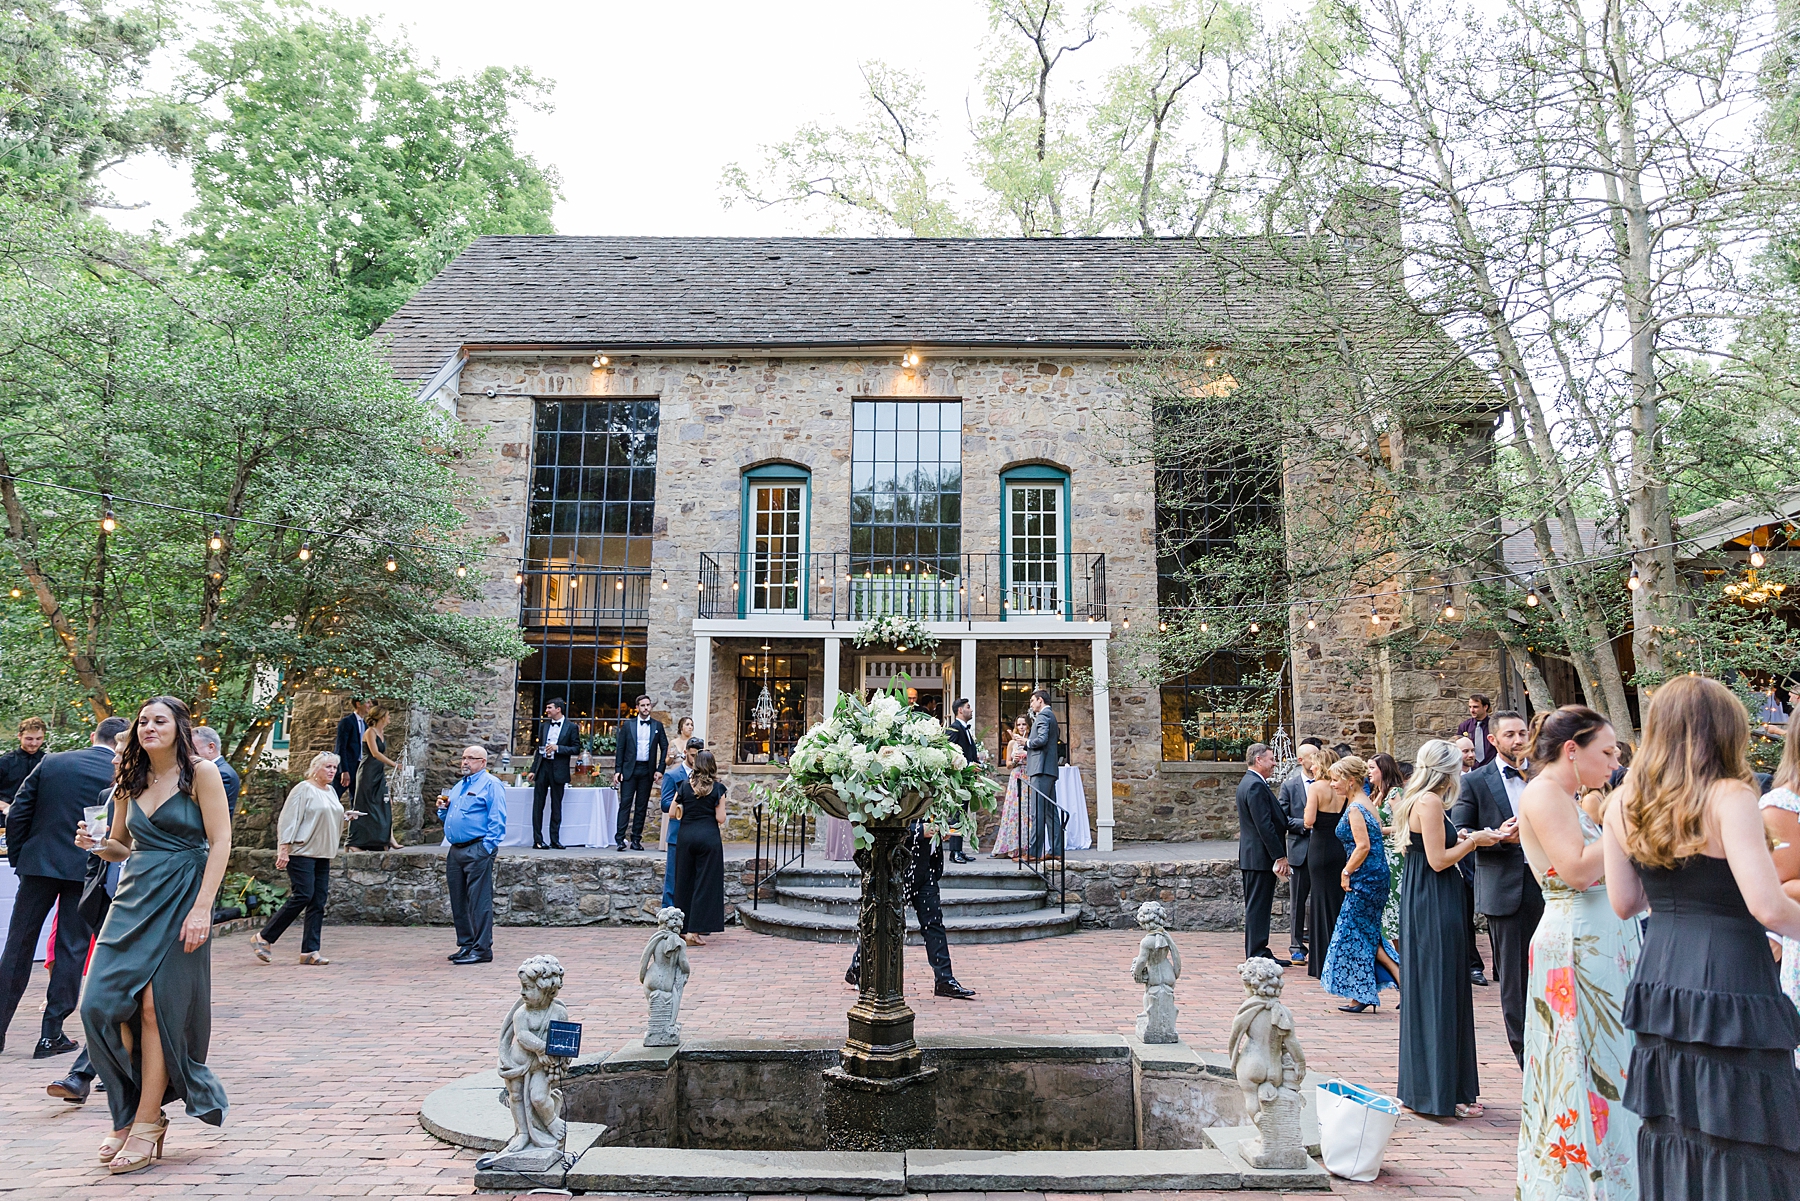 wedding guests mingle in the courtyard during cocktail hour